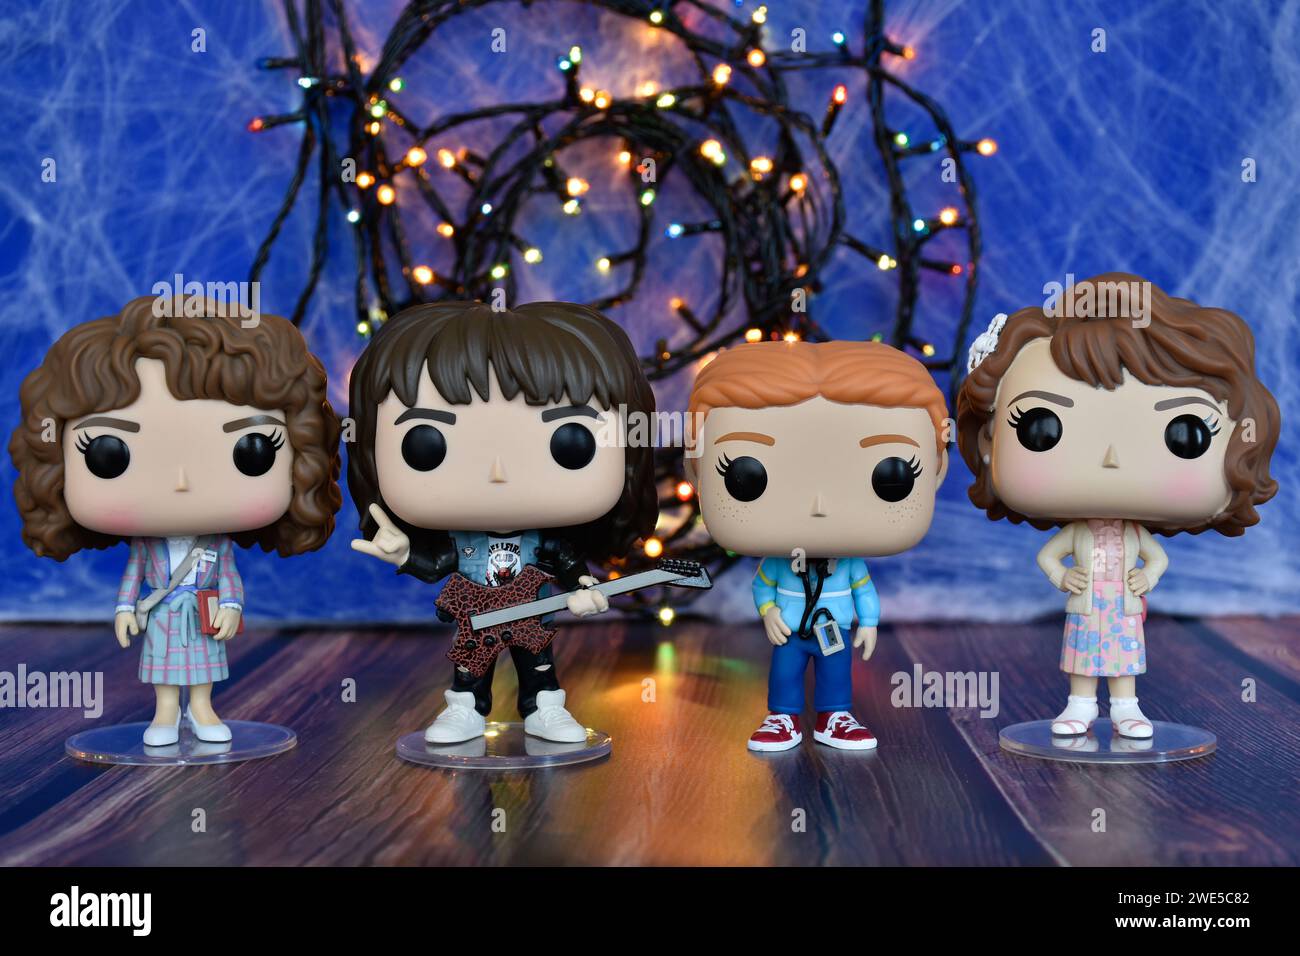 Funko Pop action figures of Nancy, Eddie, Max and Robin from TV series Stranger Things, season 4. Blue foggy background, colorful lights, mysterious. Stock Photo